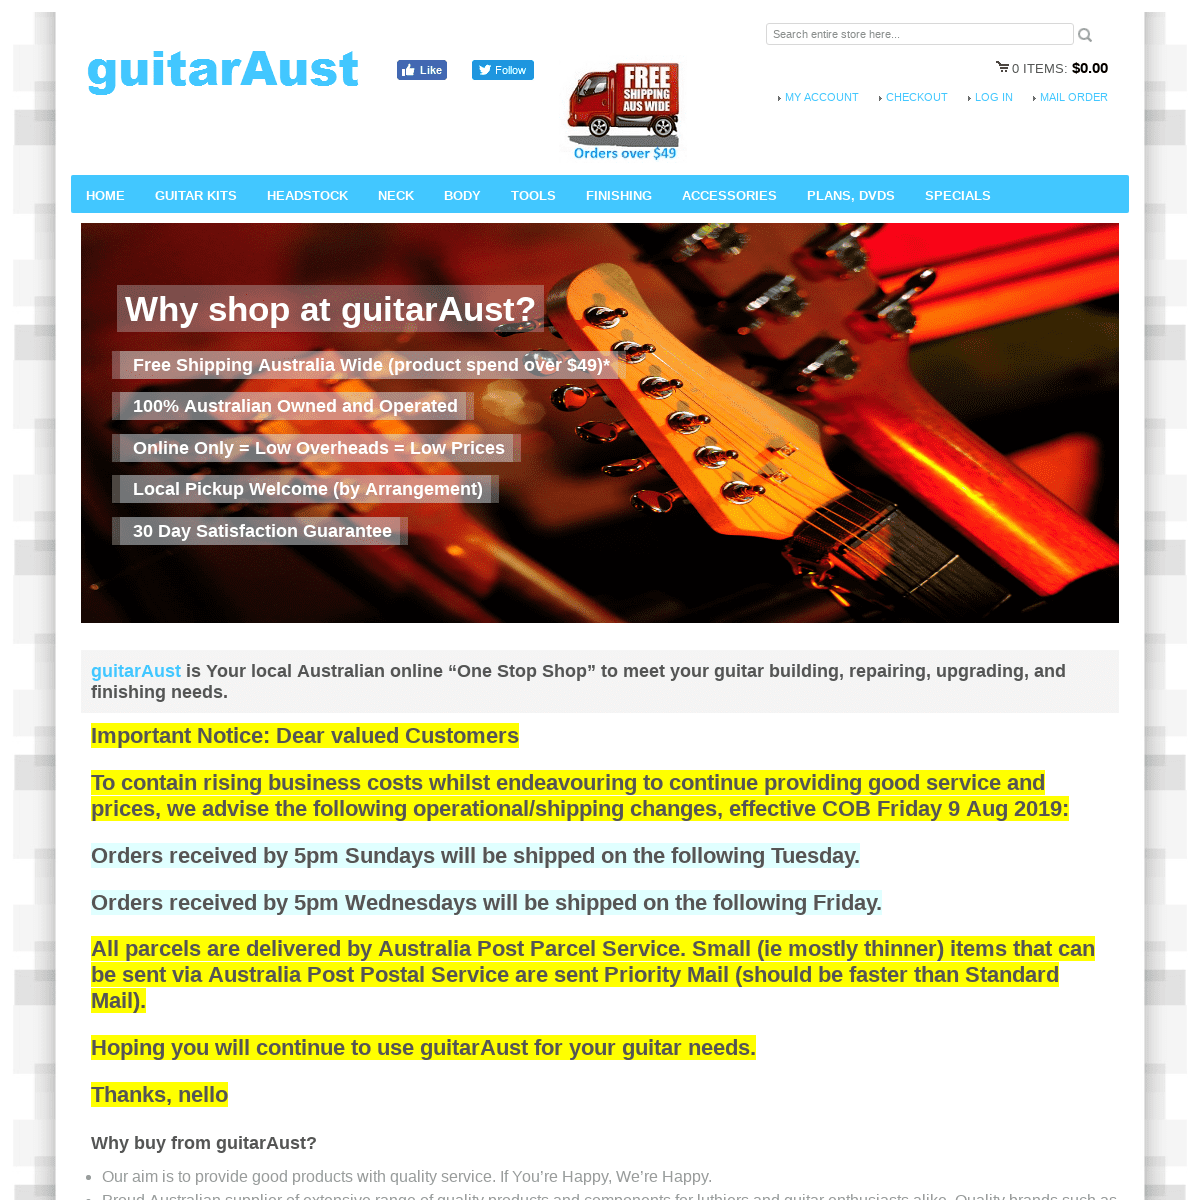 guitarAust - Your online “One Stop Shop” to meet your guitar building, repairing, upgrading, and finishing needs.